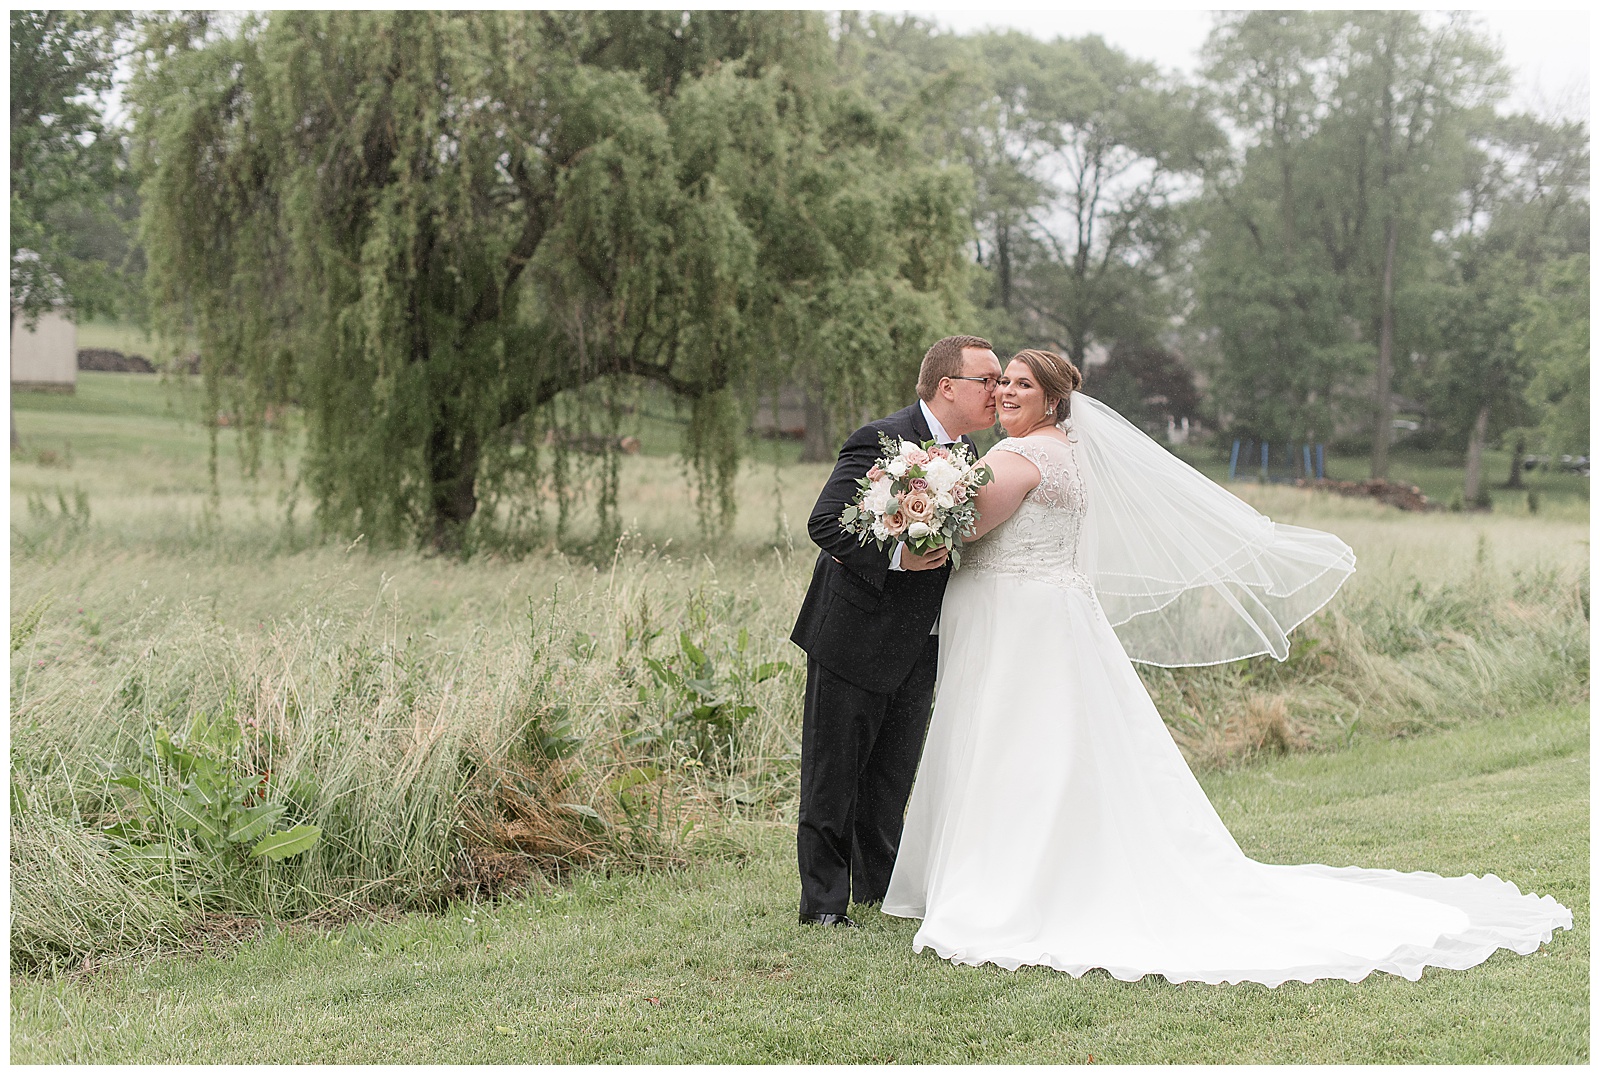 groom kisses bride's right cheek as her veil blows behind her near tall grasses and willow tree in strasburg pennsylvania